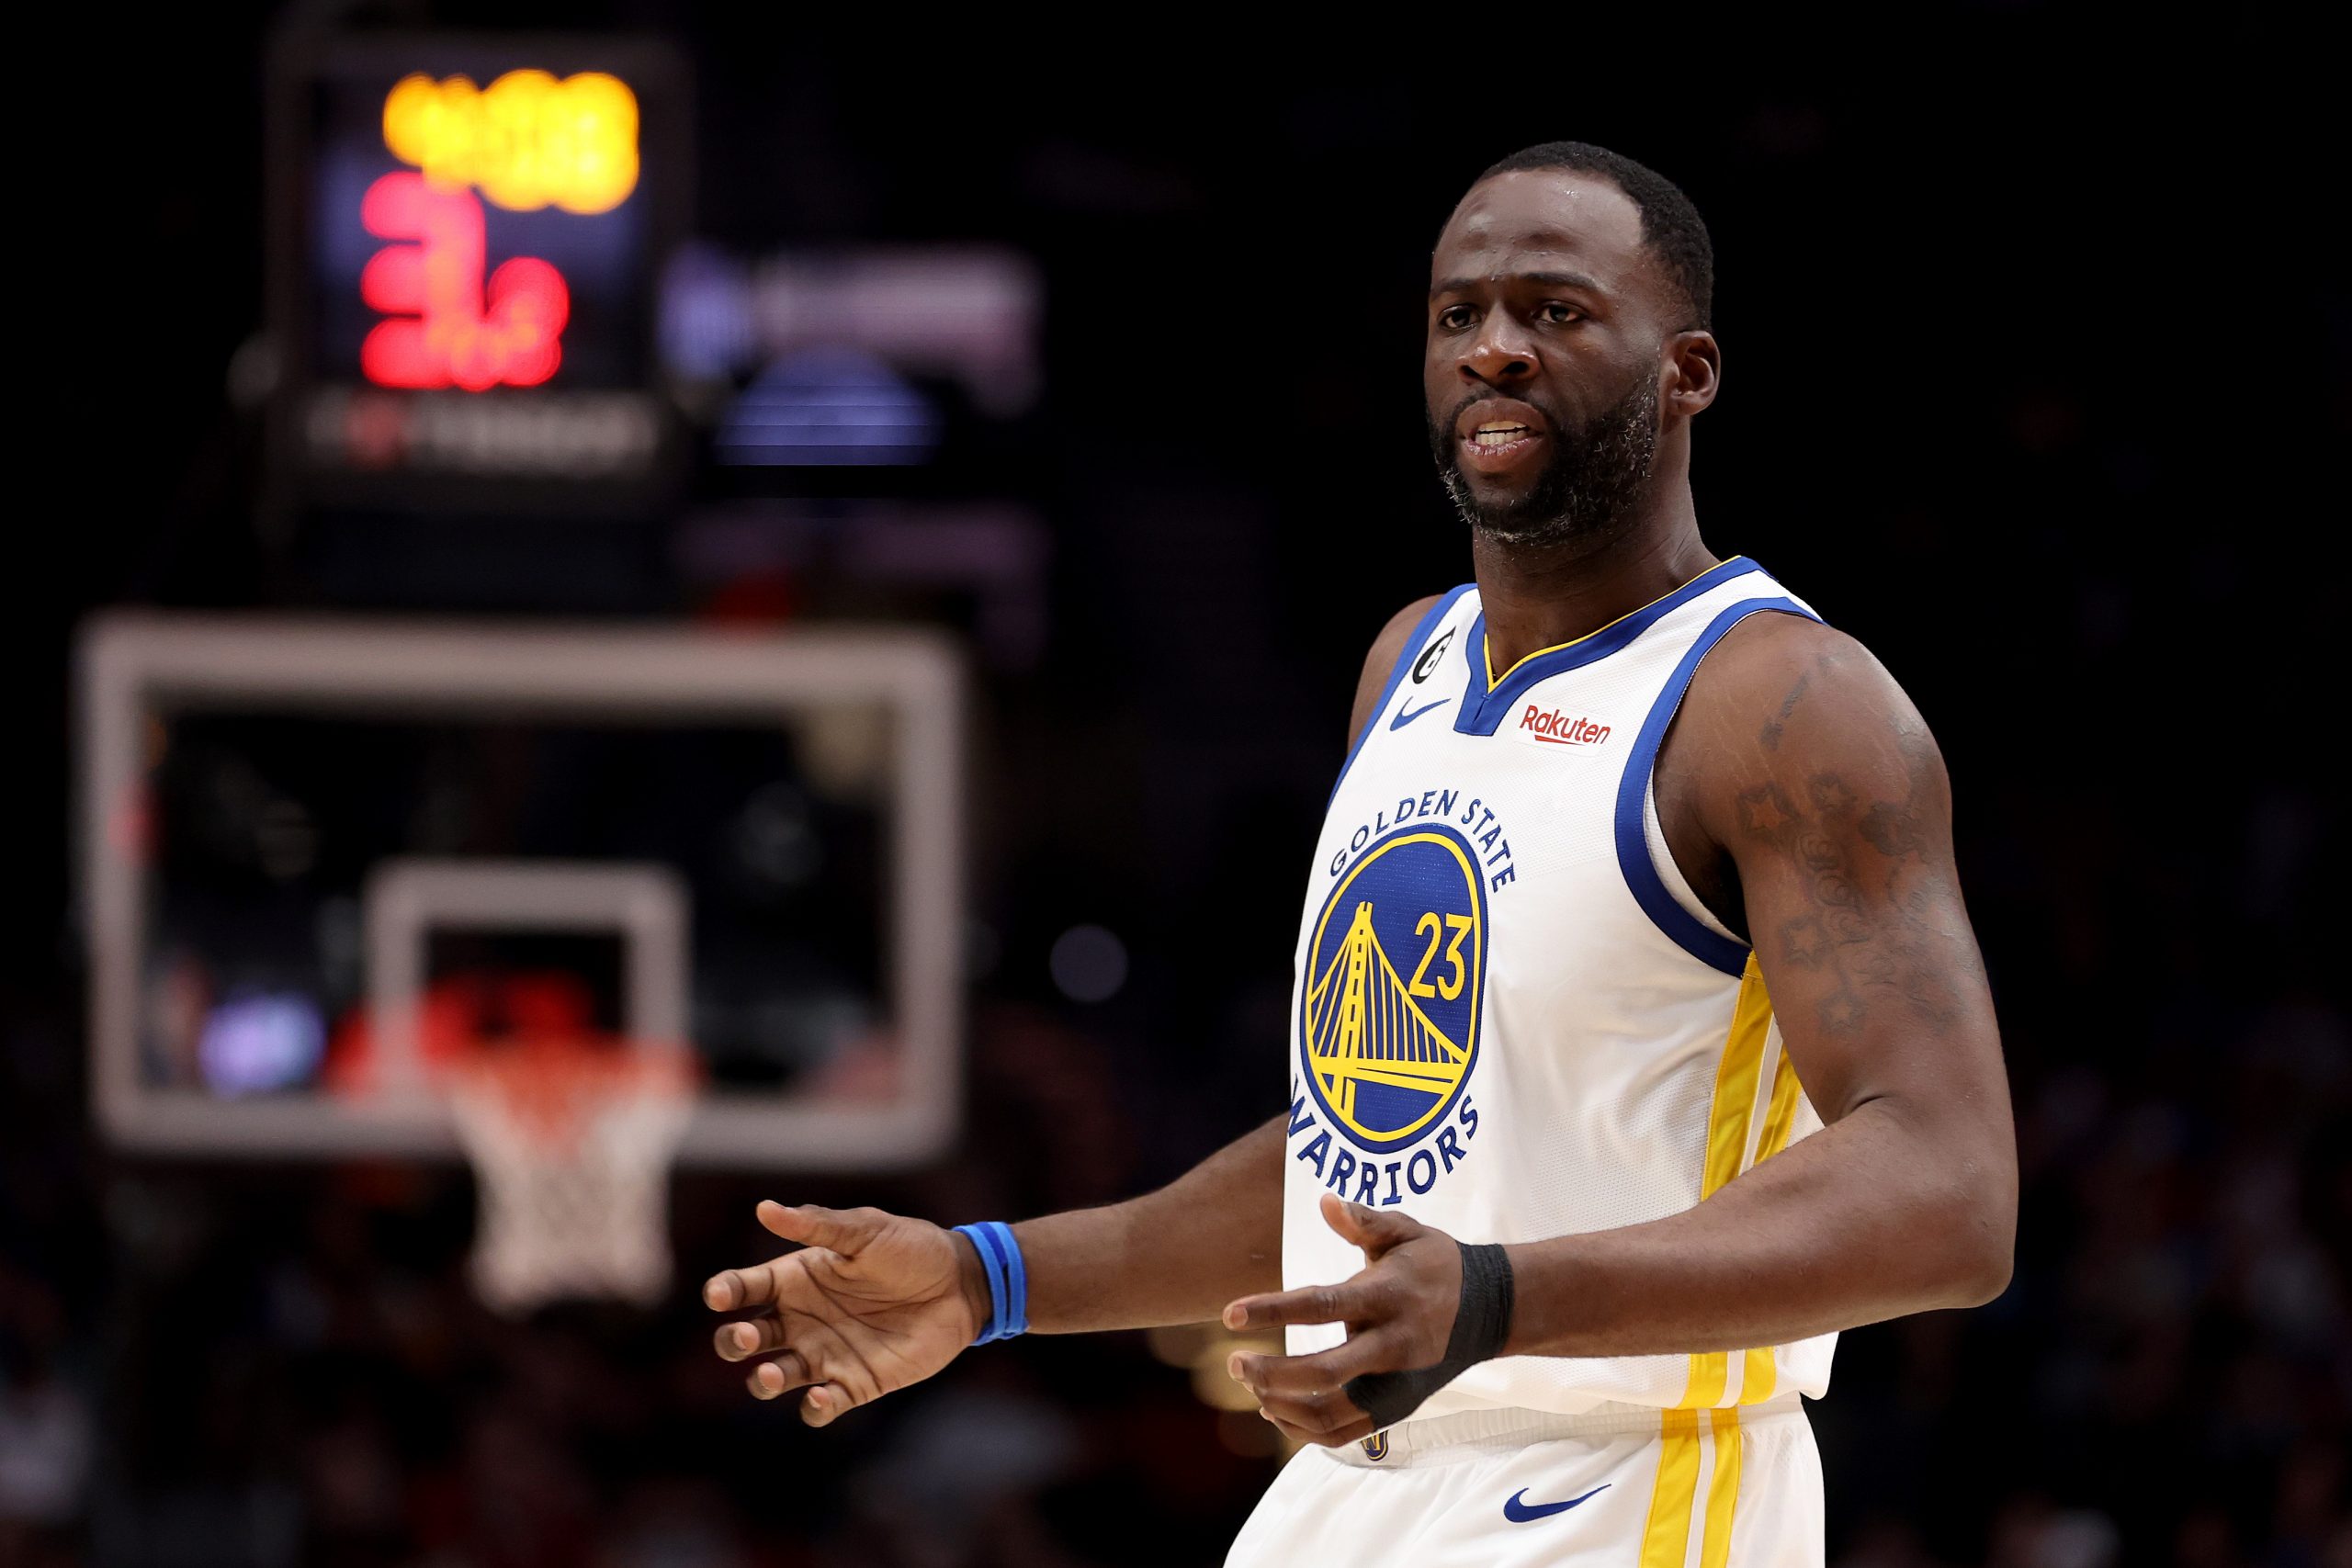 Draymond Green #23 of the Golden State Warriors reacts during the second quarter against the Portla...